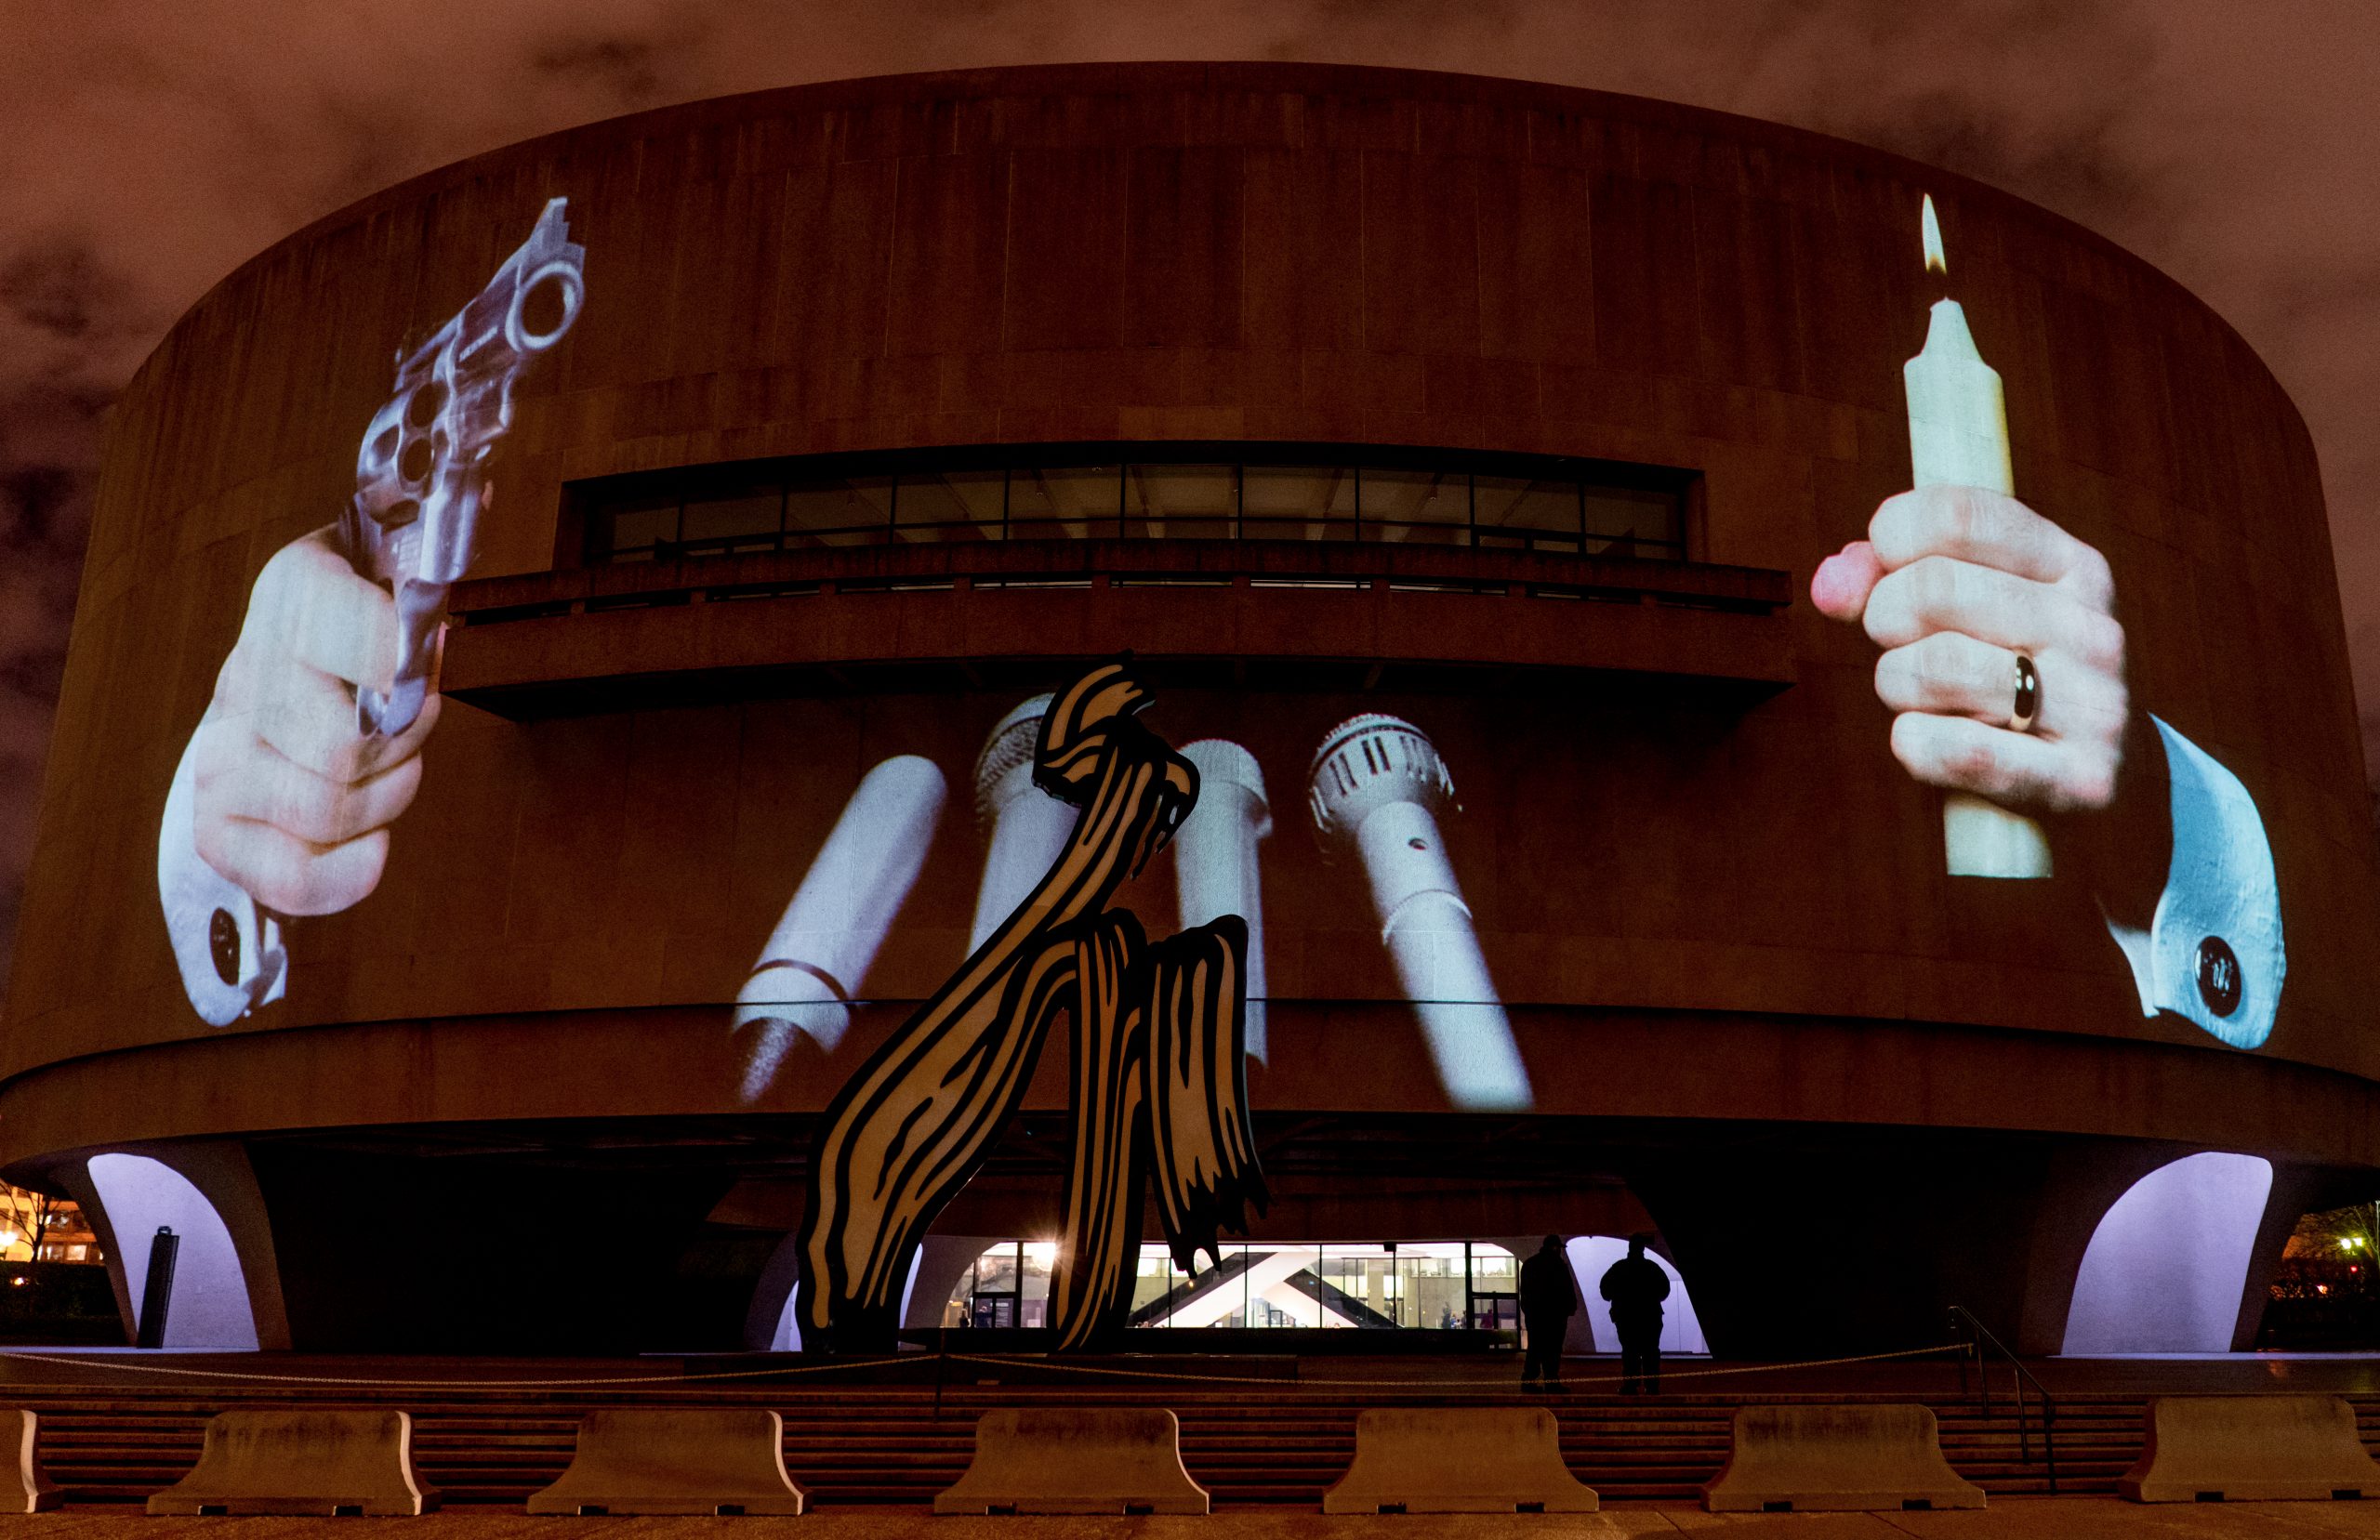 A photograph of the facade of the Hirshhorn Museum at night with a projection of a large scale hand holding a revolver, a hand holding a burning candle, and a bank of microphones in between.